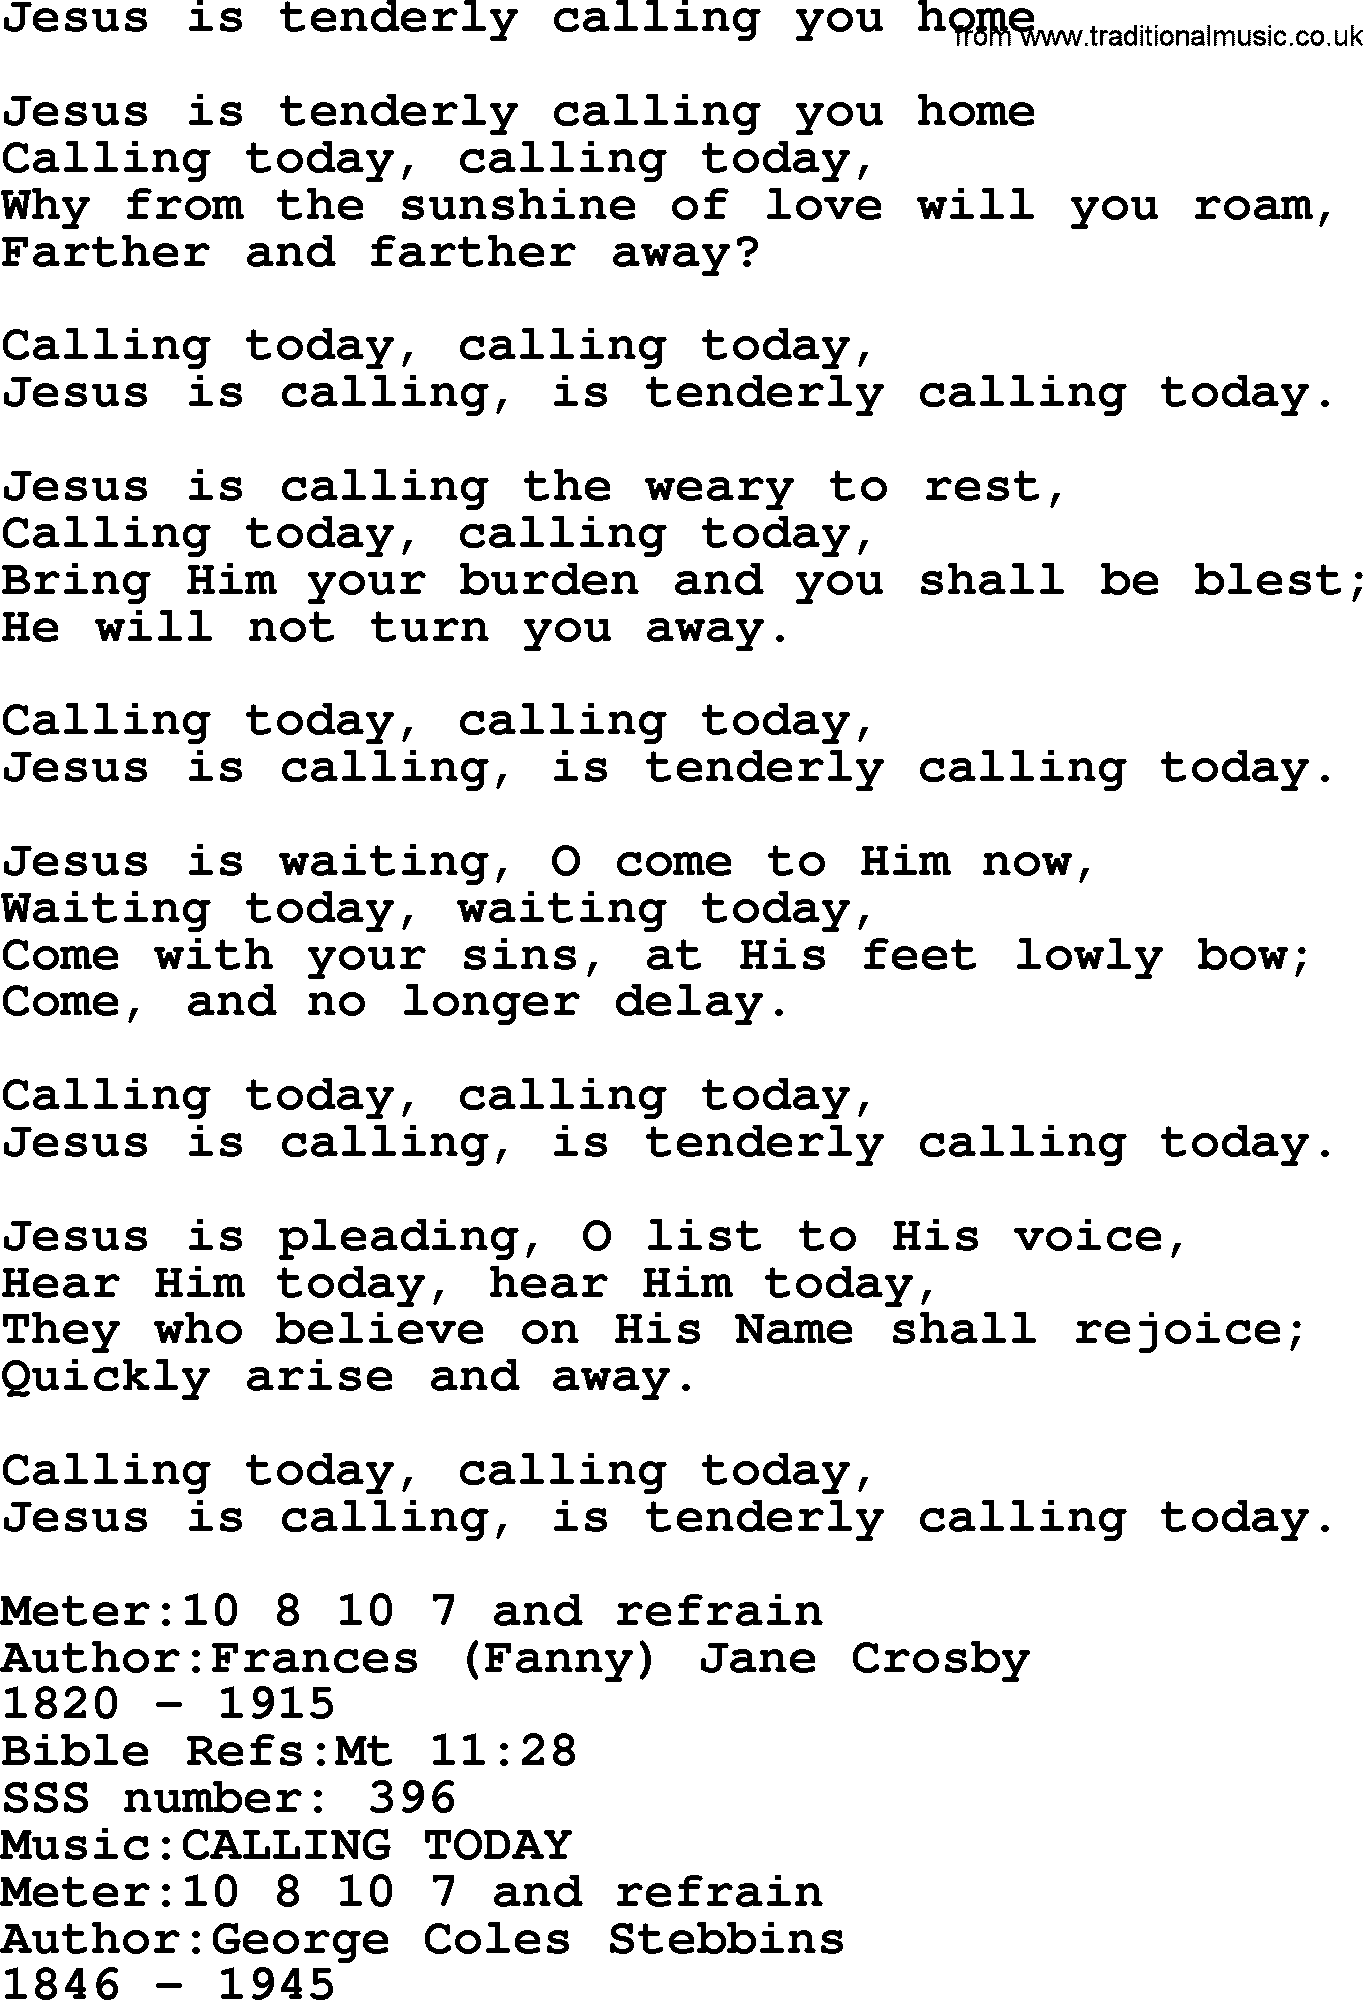 Sacred Songs and Solos complete, 1200 Hymns, title: Jesus Is Tenderly Calling You Home, lyrics and PDF